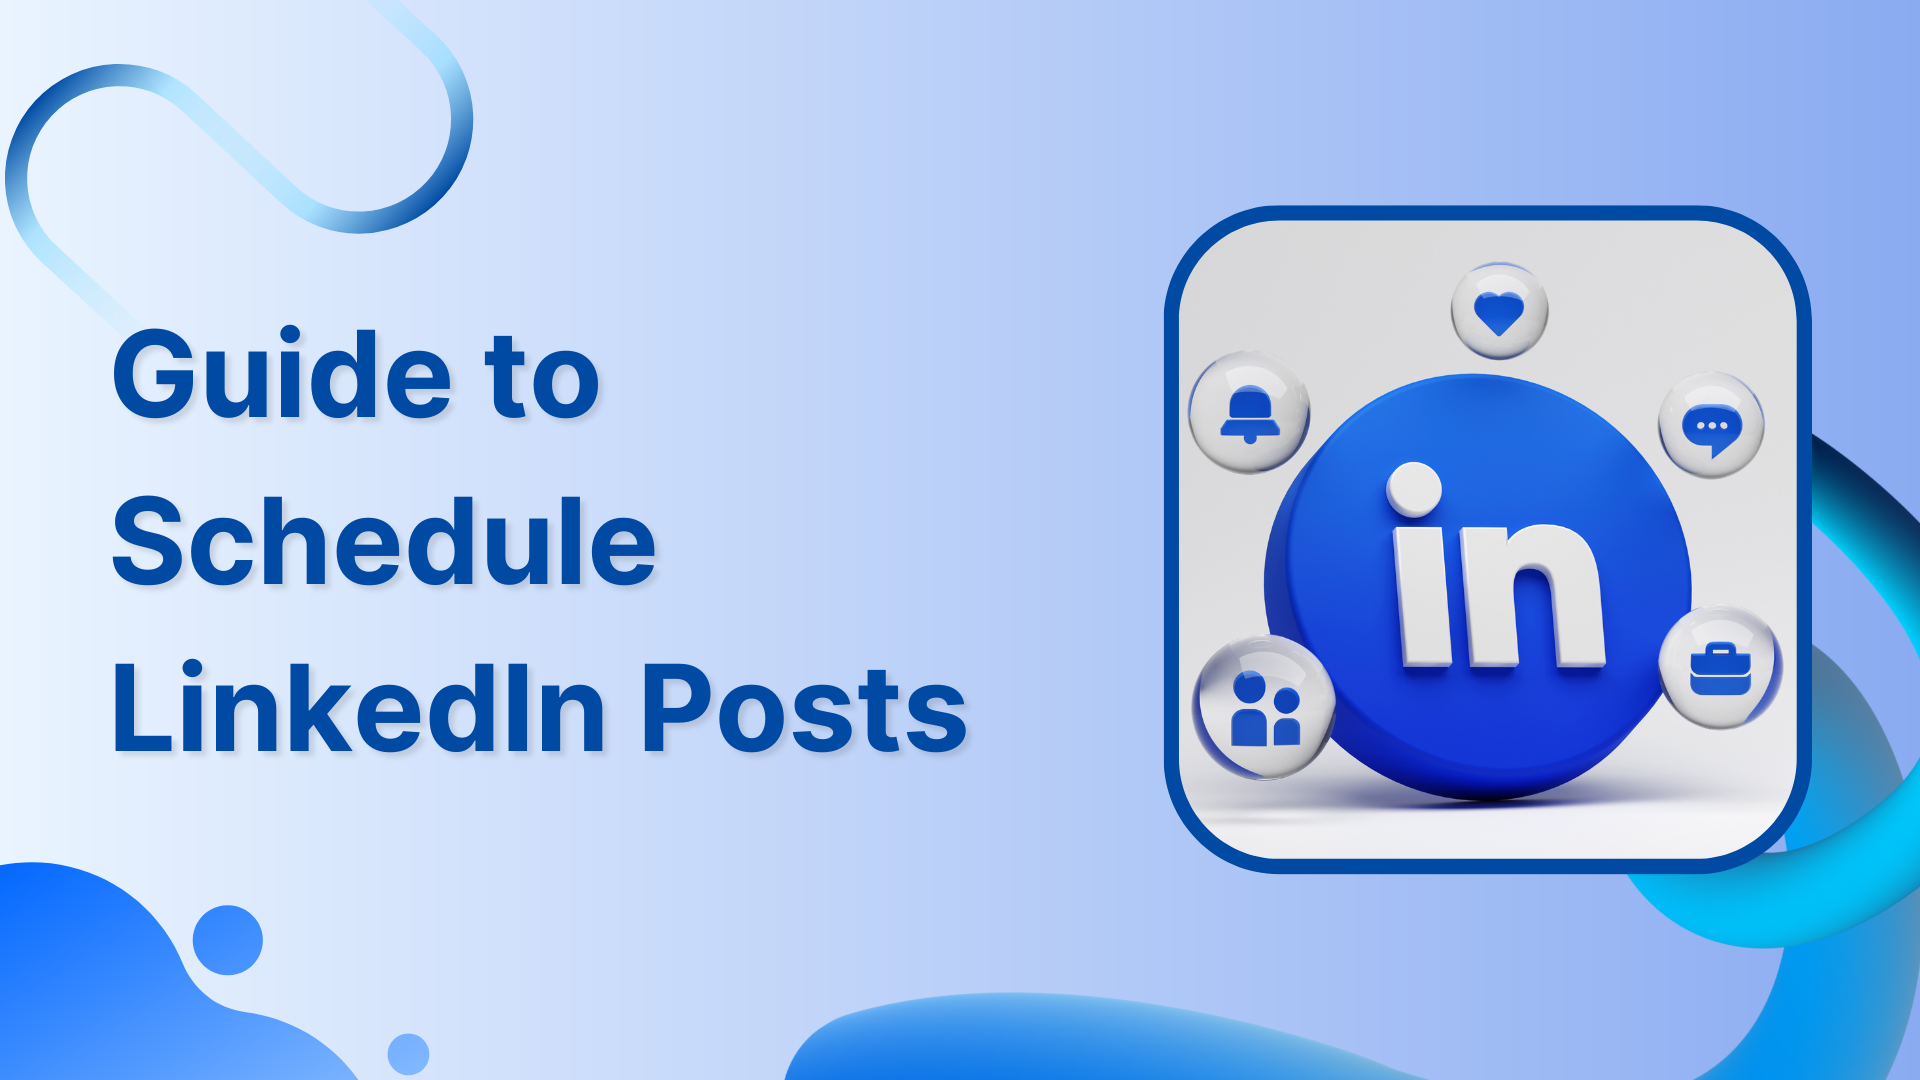 A Complete Guide to Schedule LinkedIn Posts in 2022